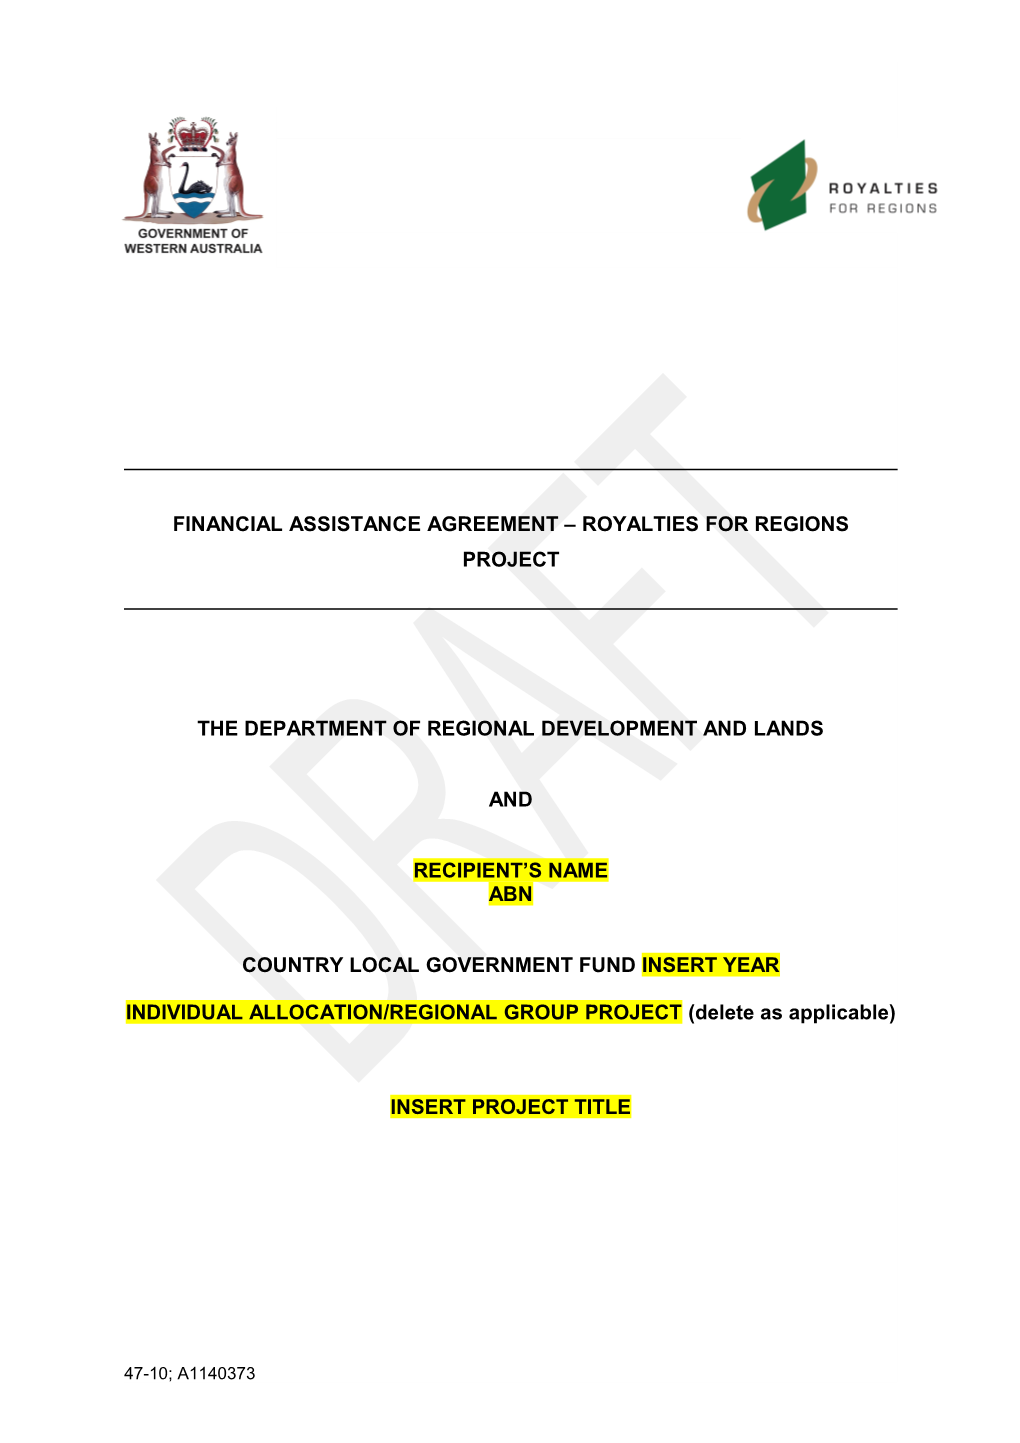 CLGF - Financial Assistance Agreement Template